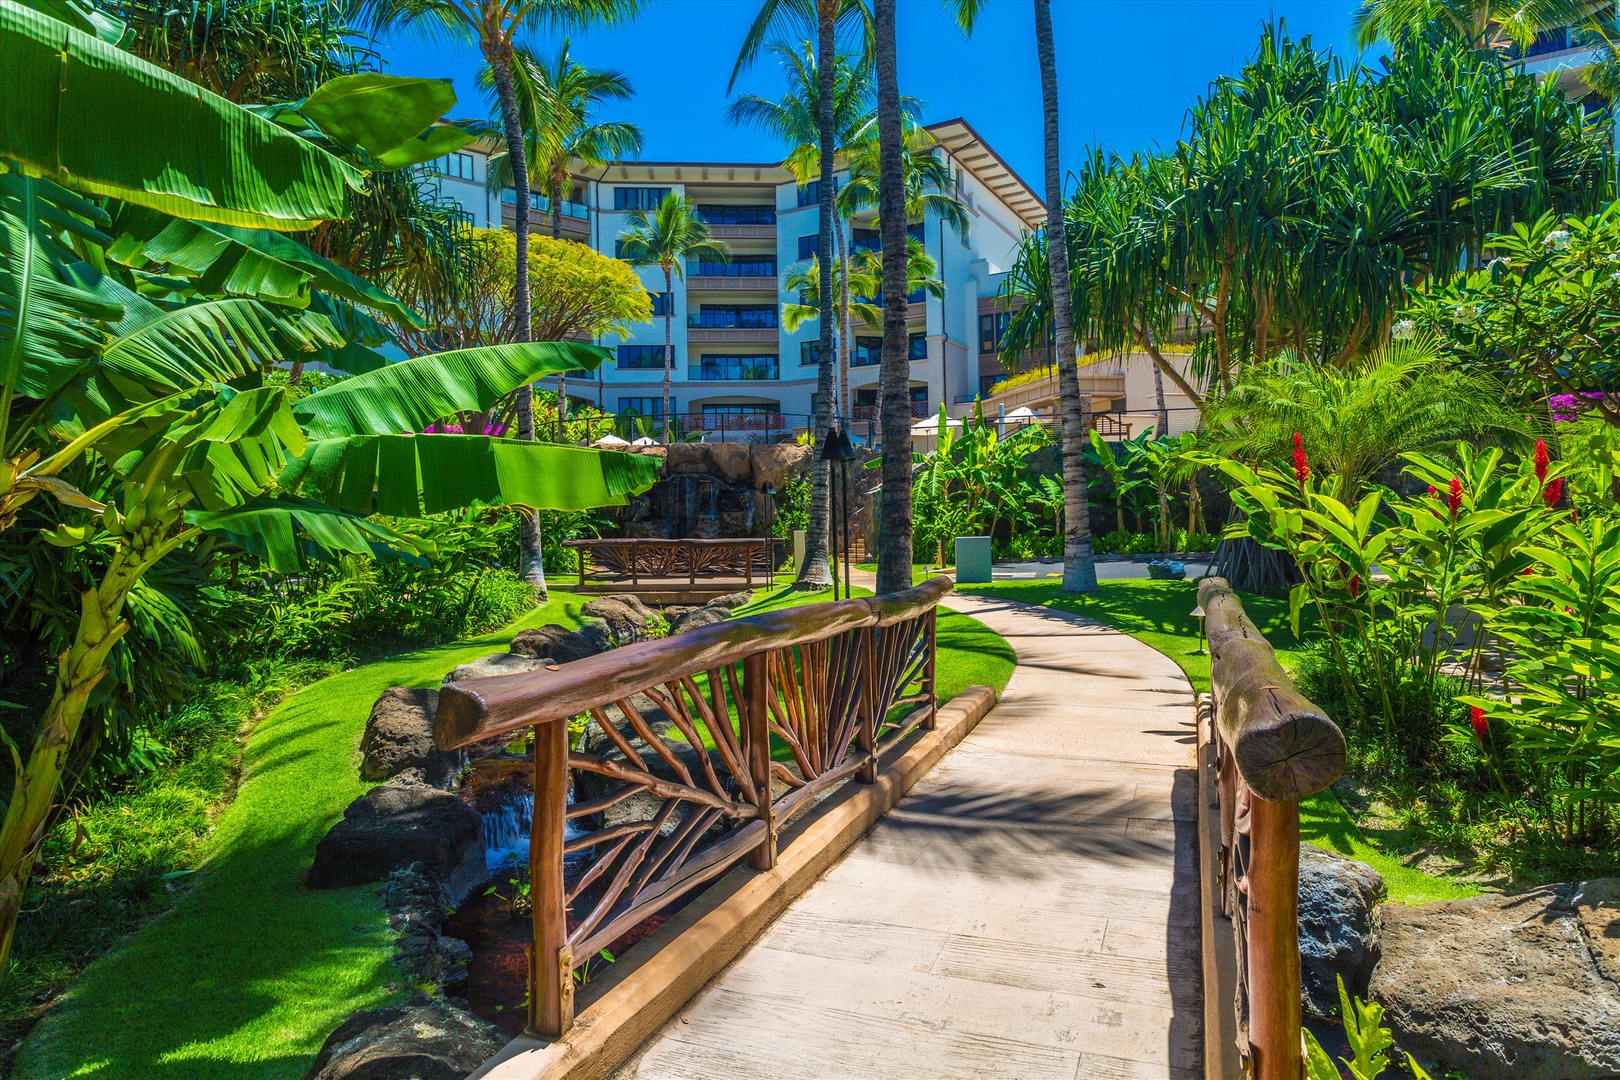 Wailea Vacation Rentals, Blue Ocean Suite H401 at Wailea Beach Villas* - Beautiful Water Features Tropical Foliage and Evening Tiki Torches Throughout the WBV Property